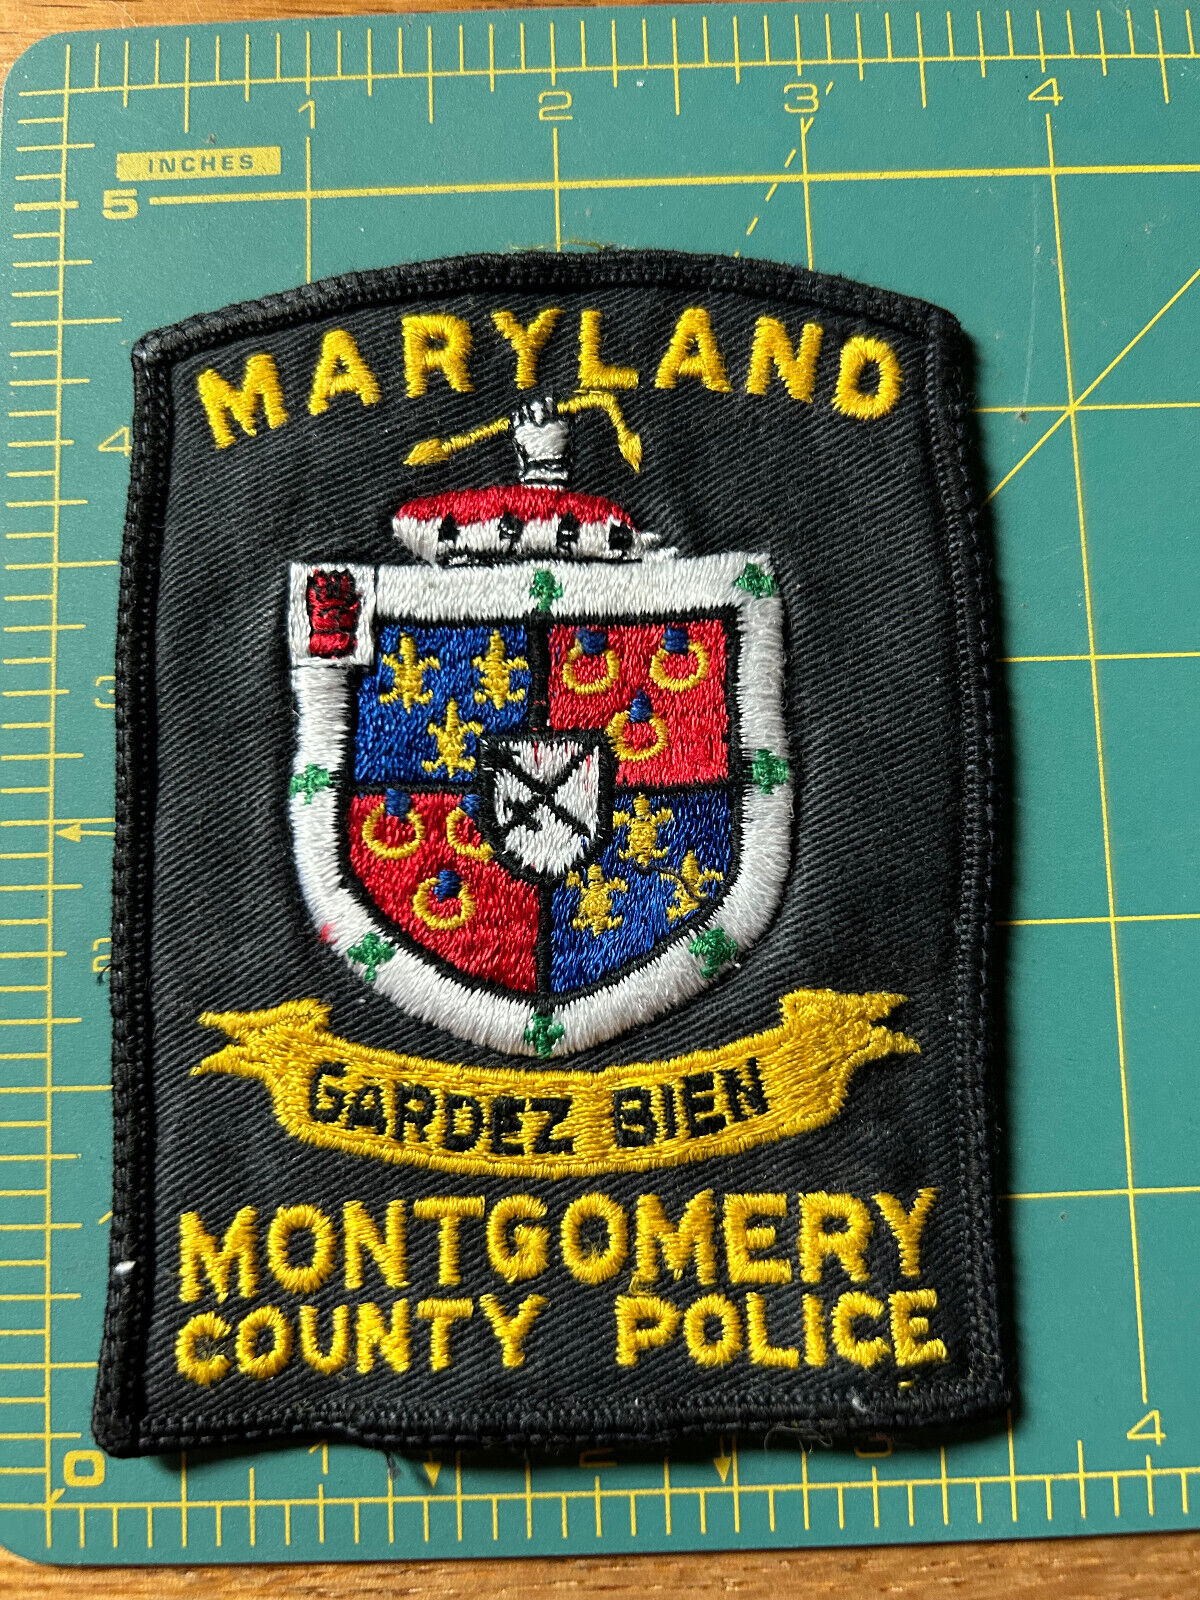 Old Style Montgomery County, MD Police patch